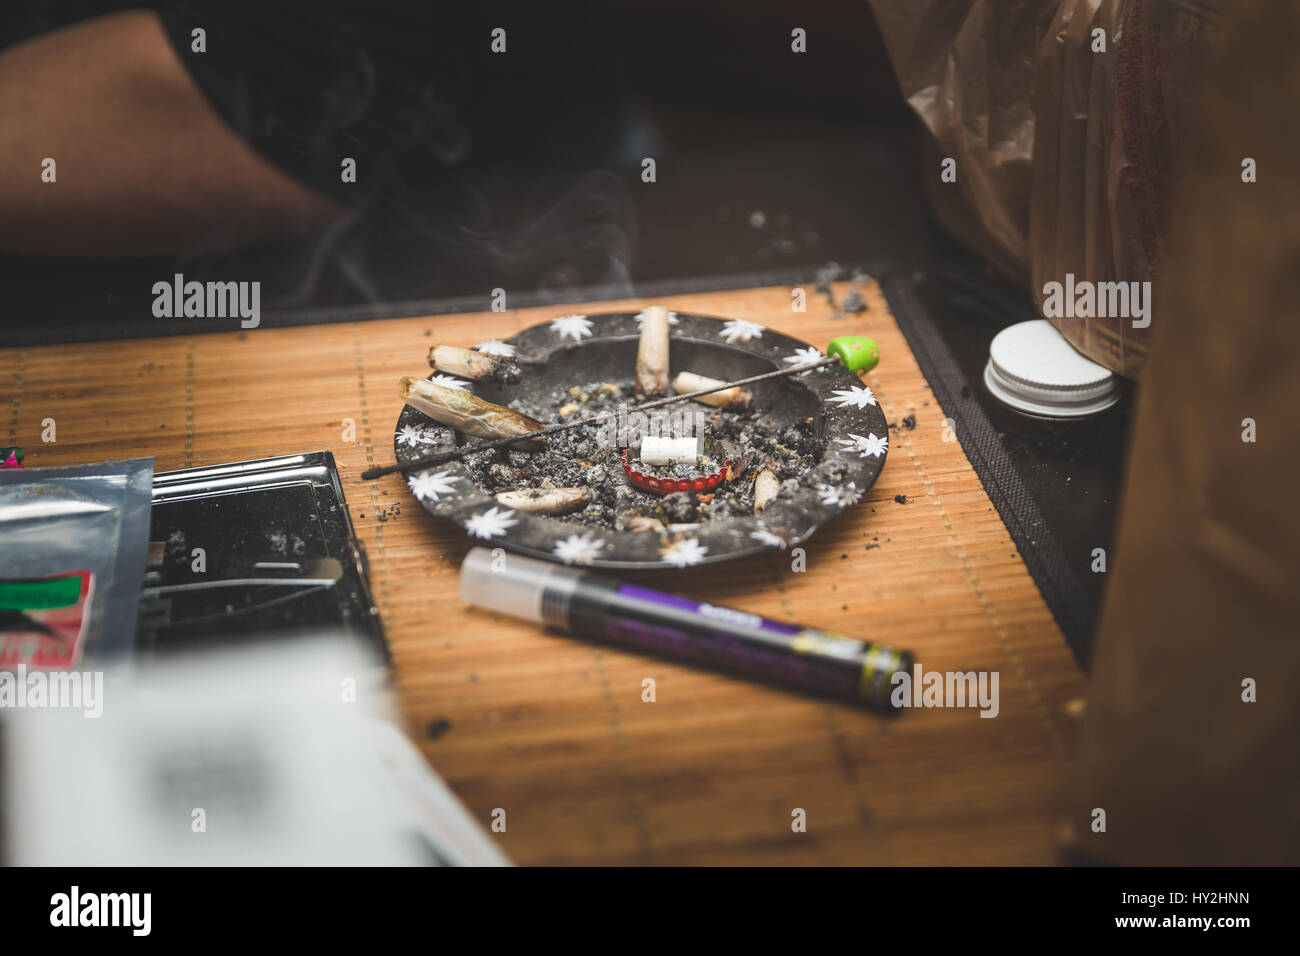 Ash tray with cigarettes, joints, or spliffs in it. Stock Photo